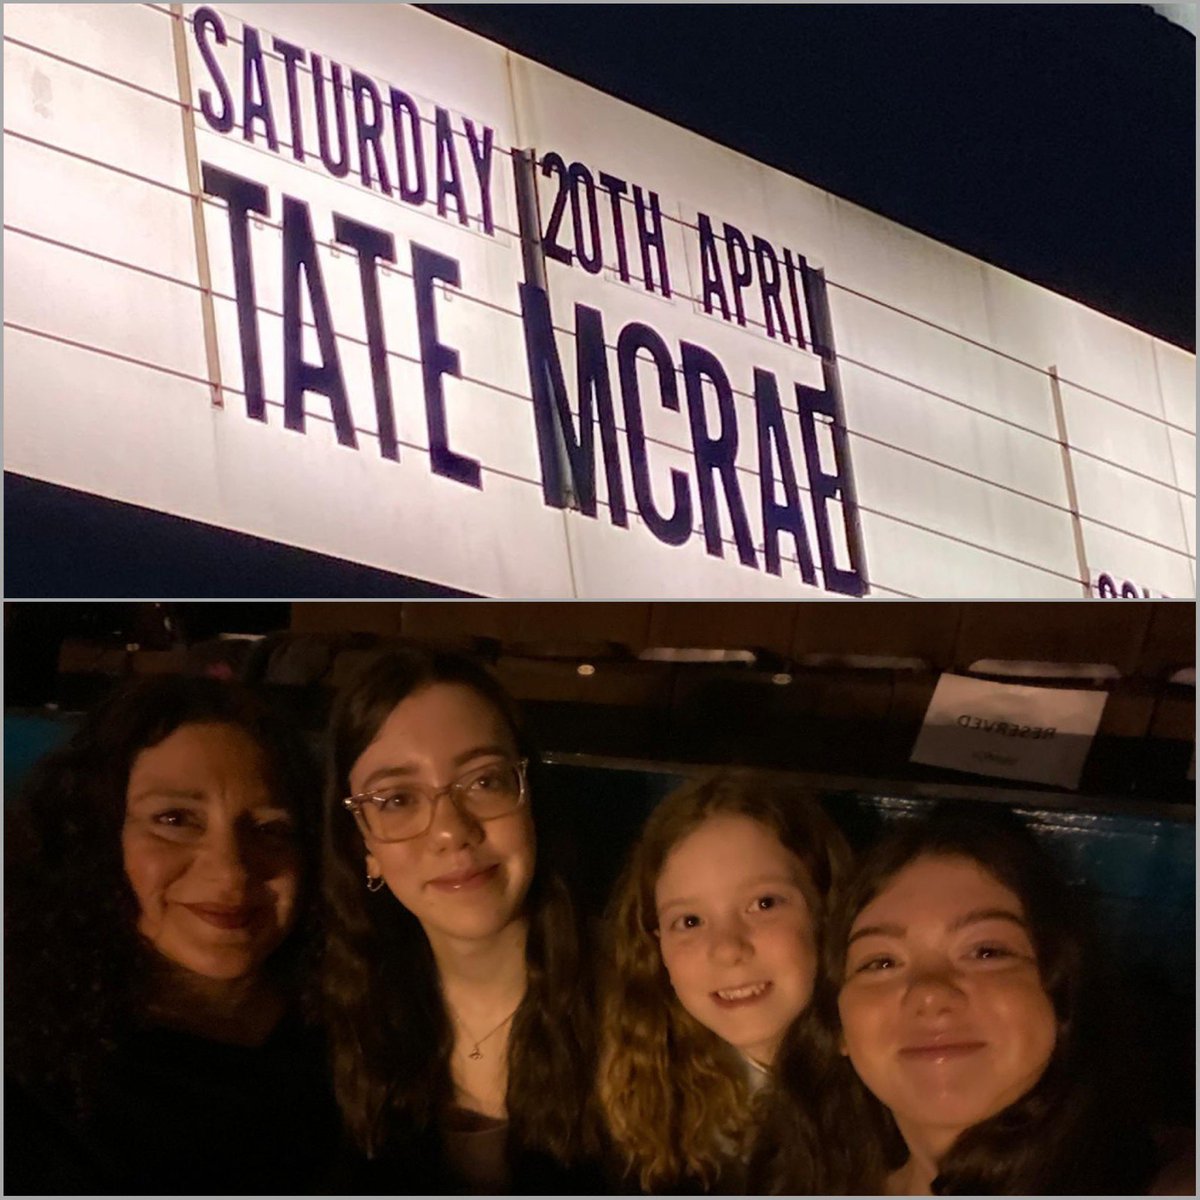 My first gig @tatemcrae with my girls and a cheeky night away in Glasgow on Saturday.  Great hospitality by @O2AcademyGla and the city of Glasgow. We loved your patter 😍